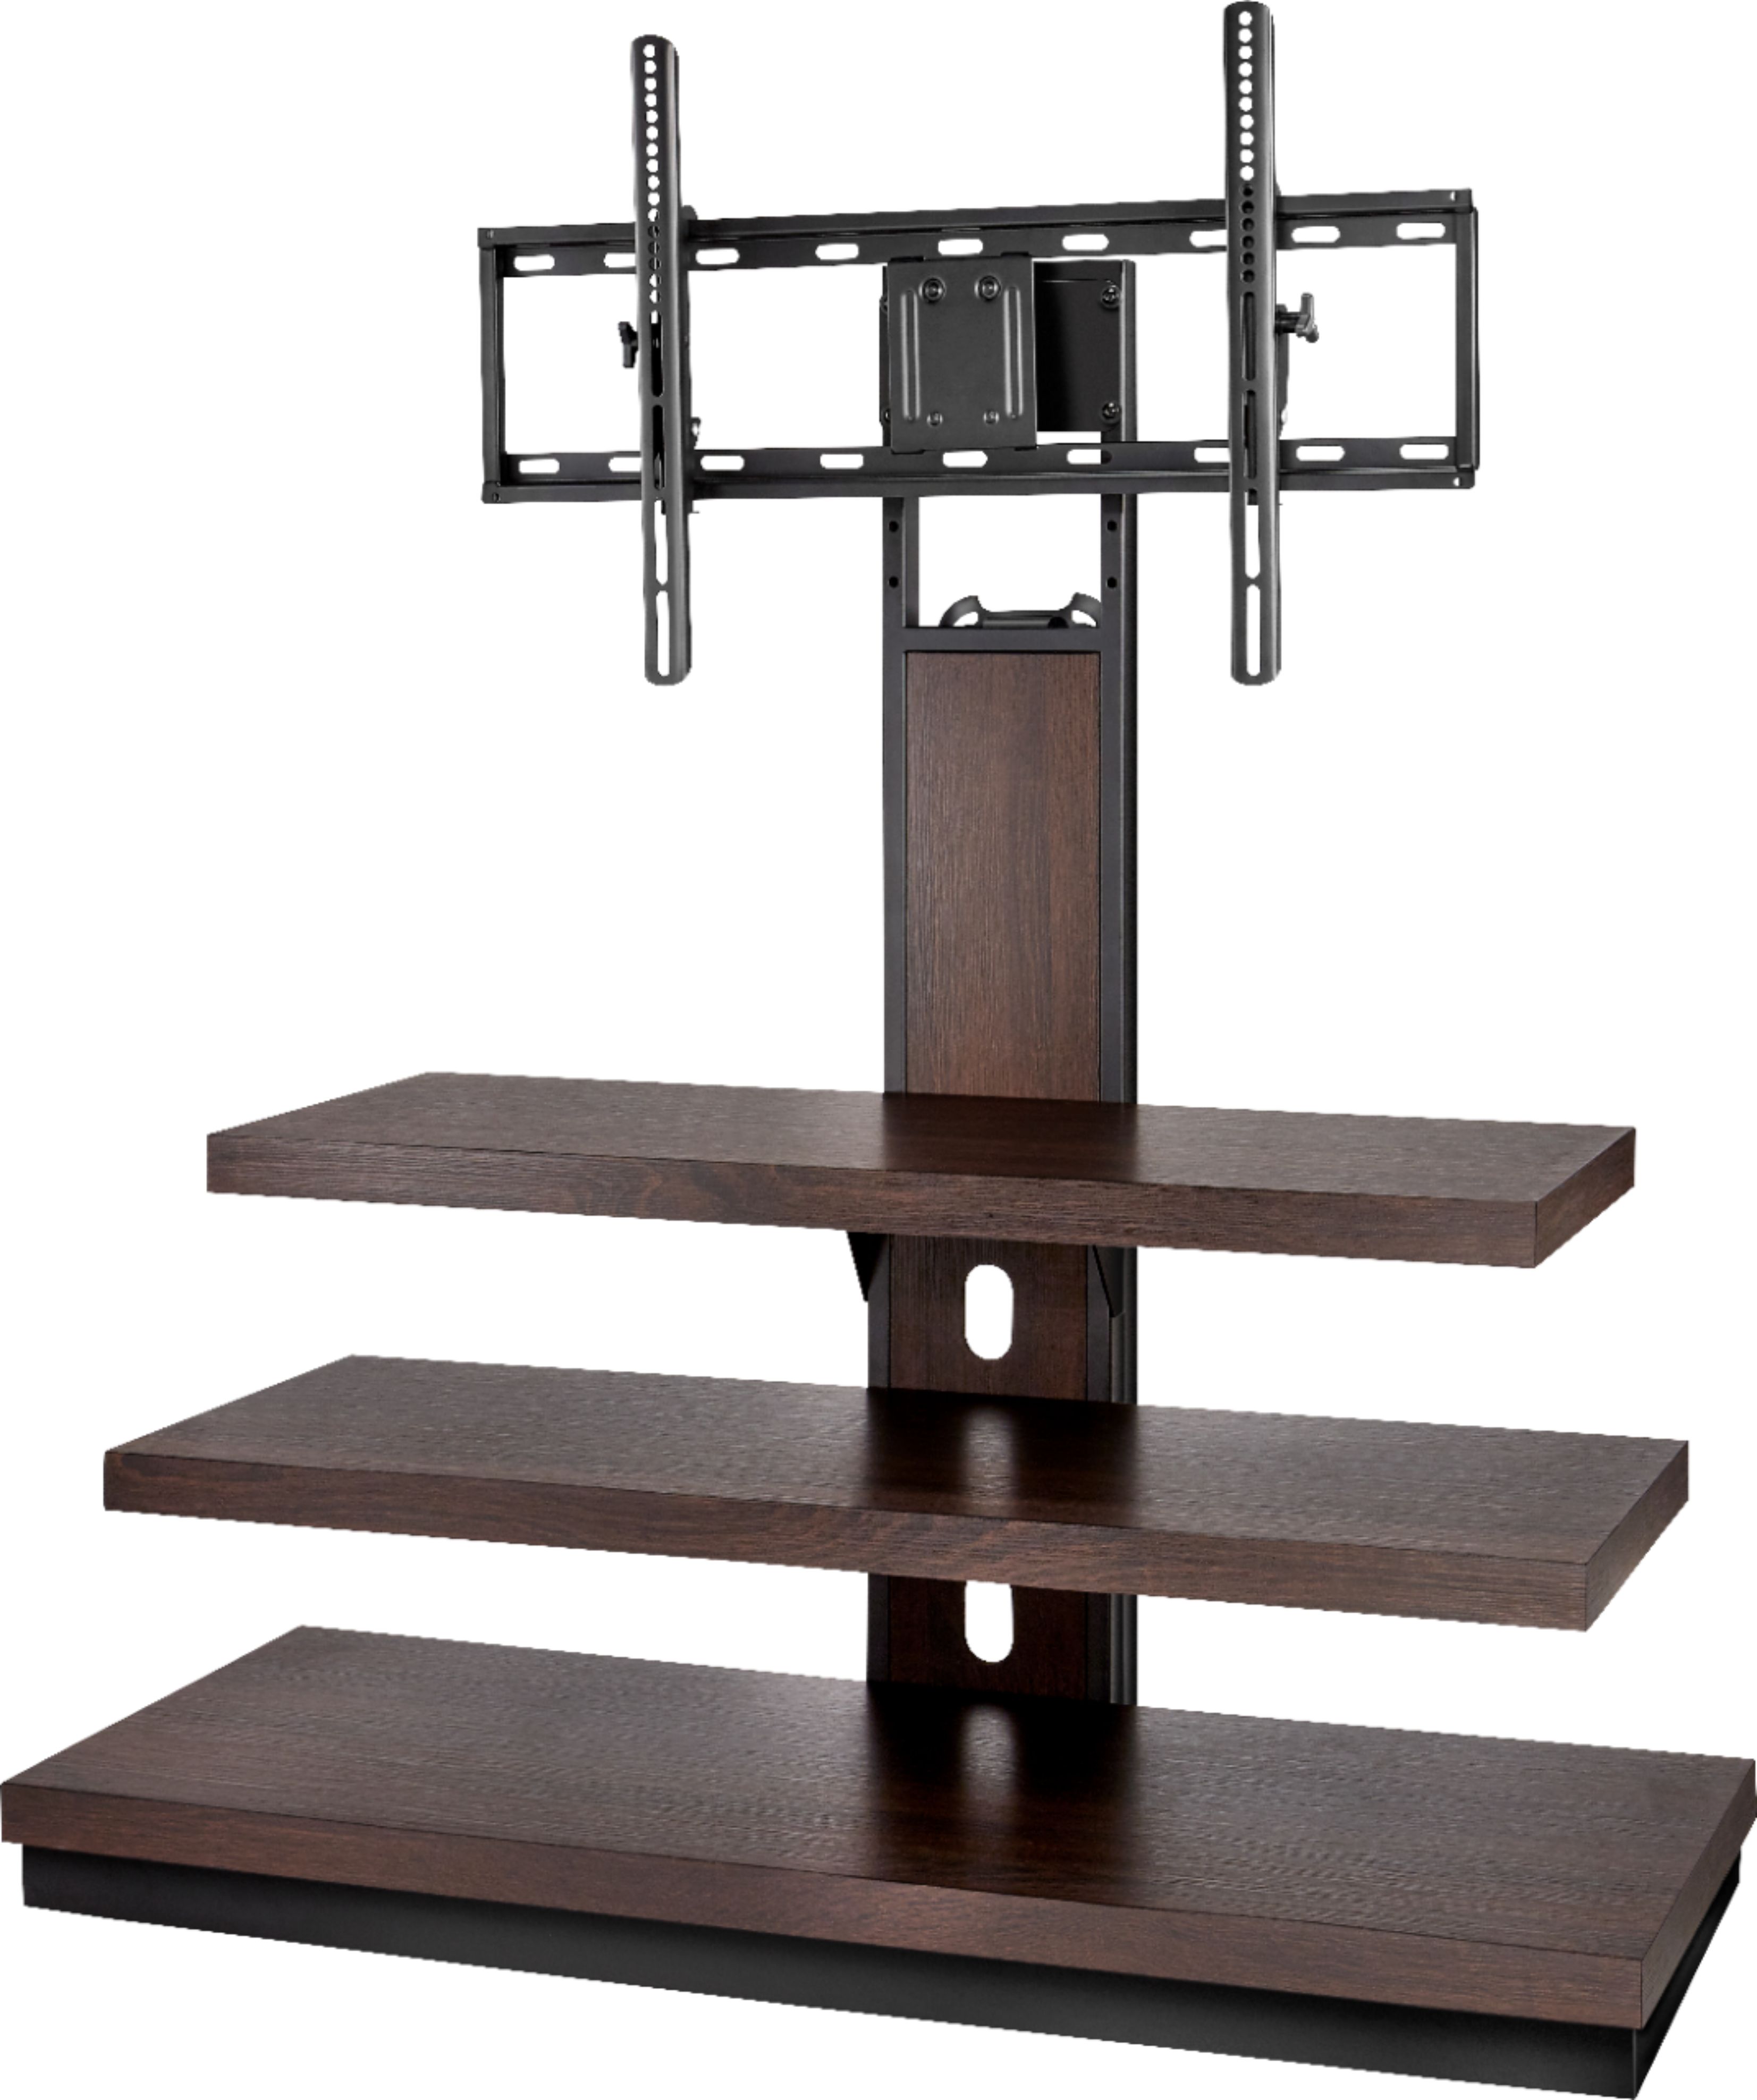 55 inch flat tv stand